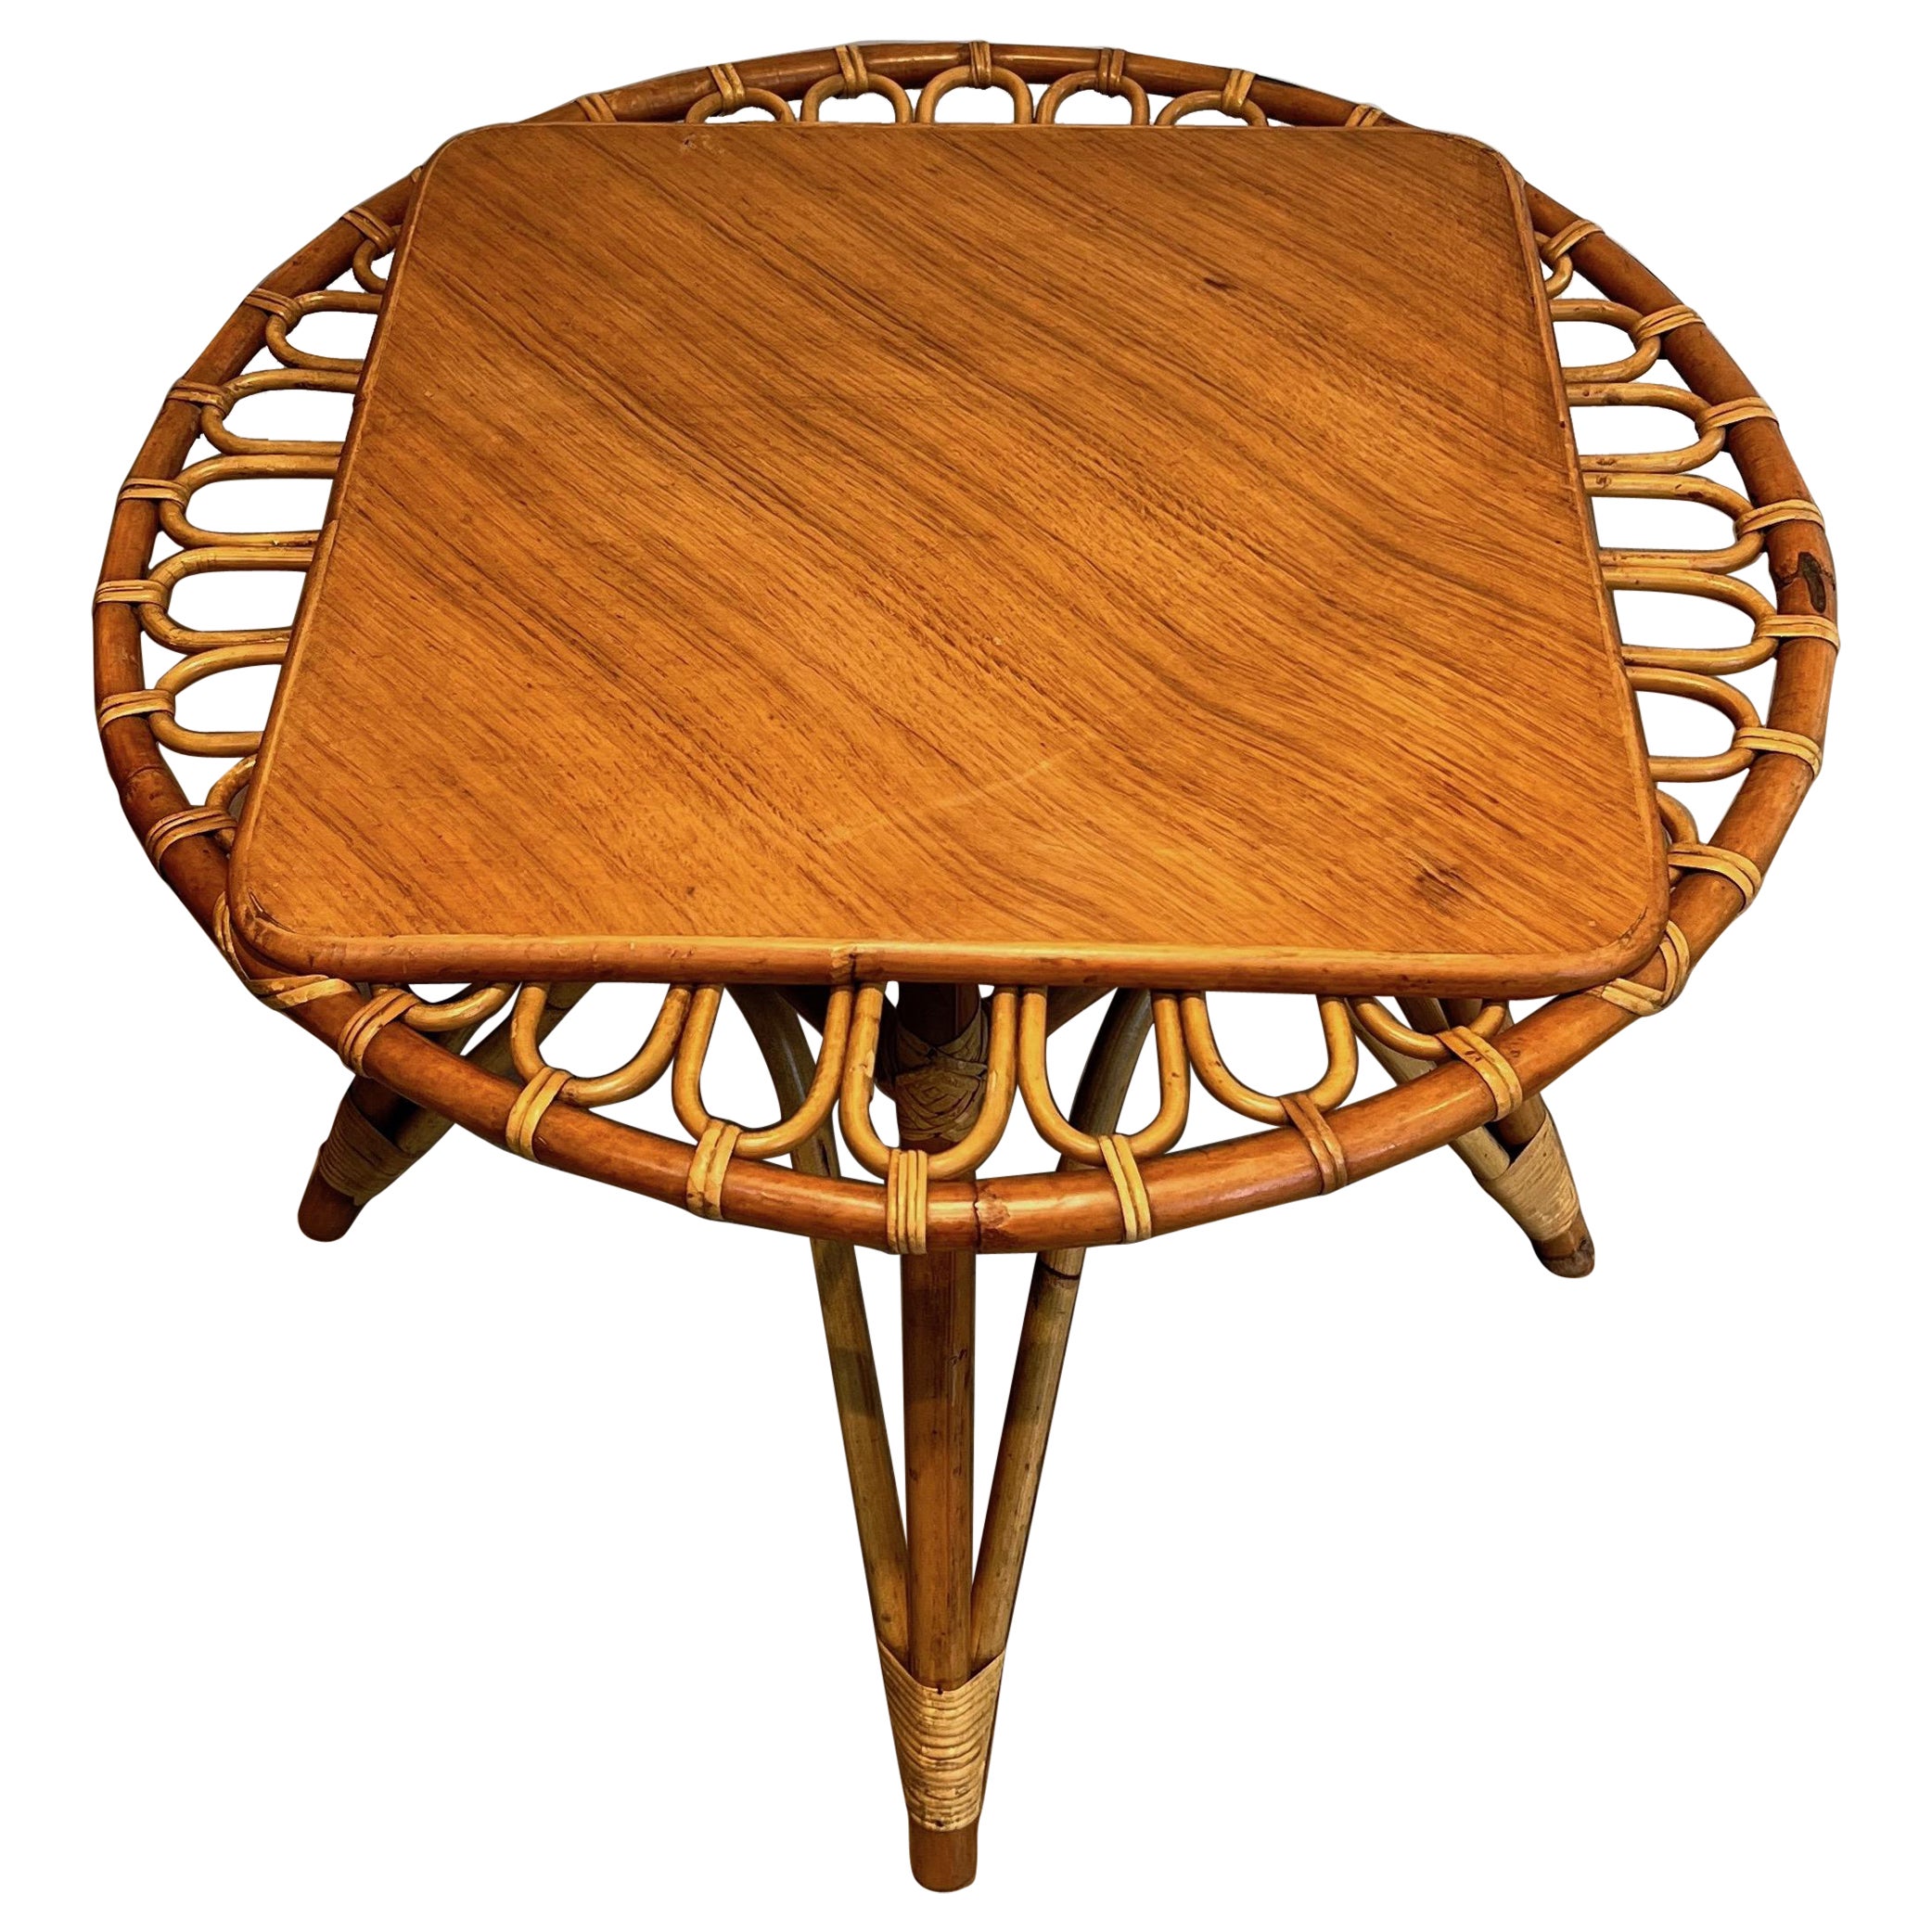 Round trampoline, rattan coffee table. French work. Circa 1950